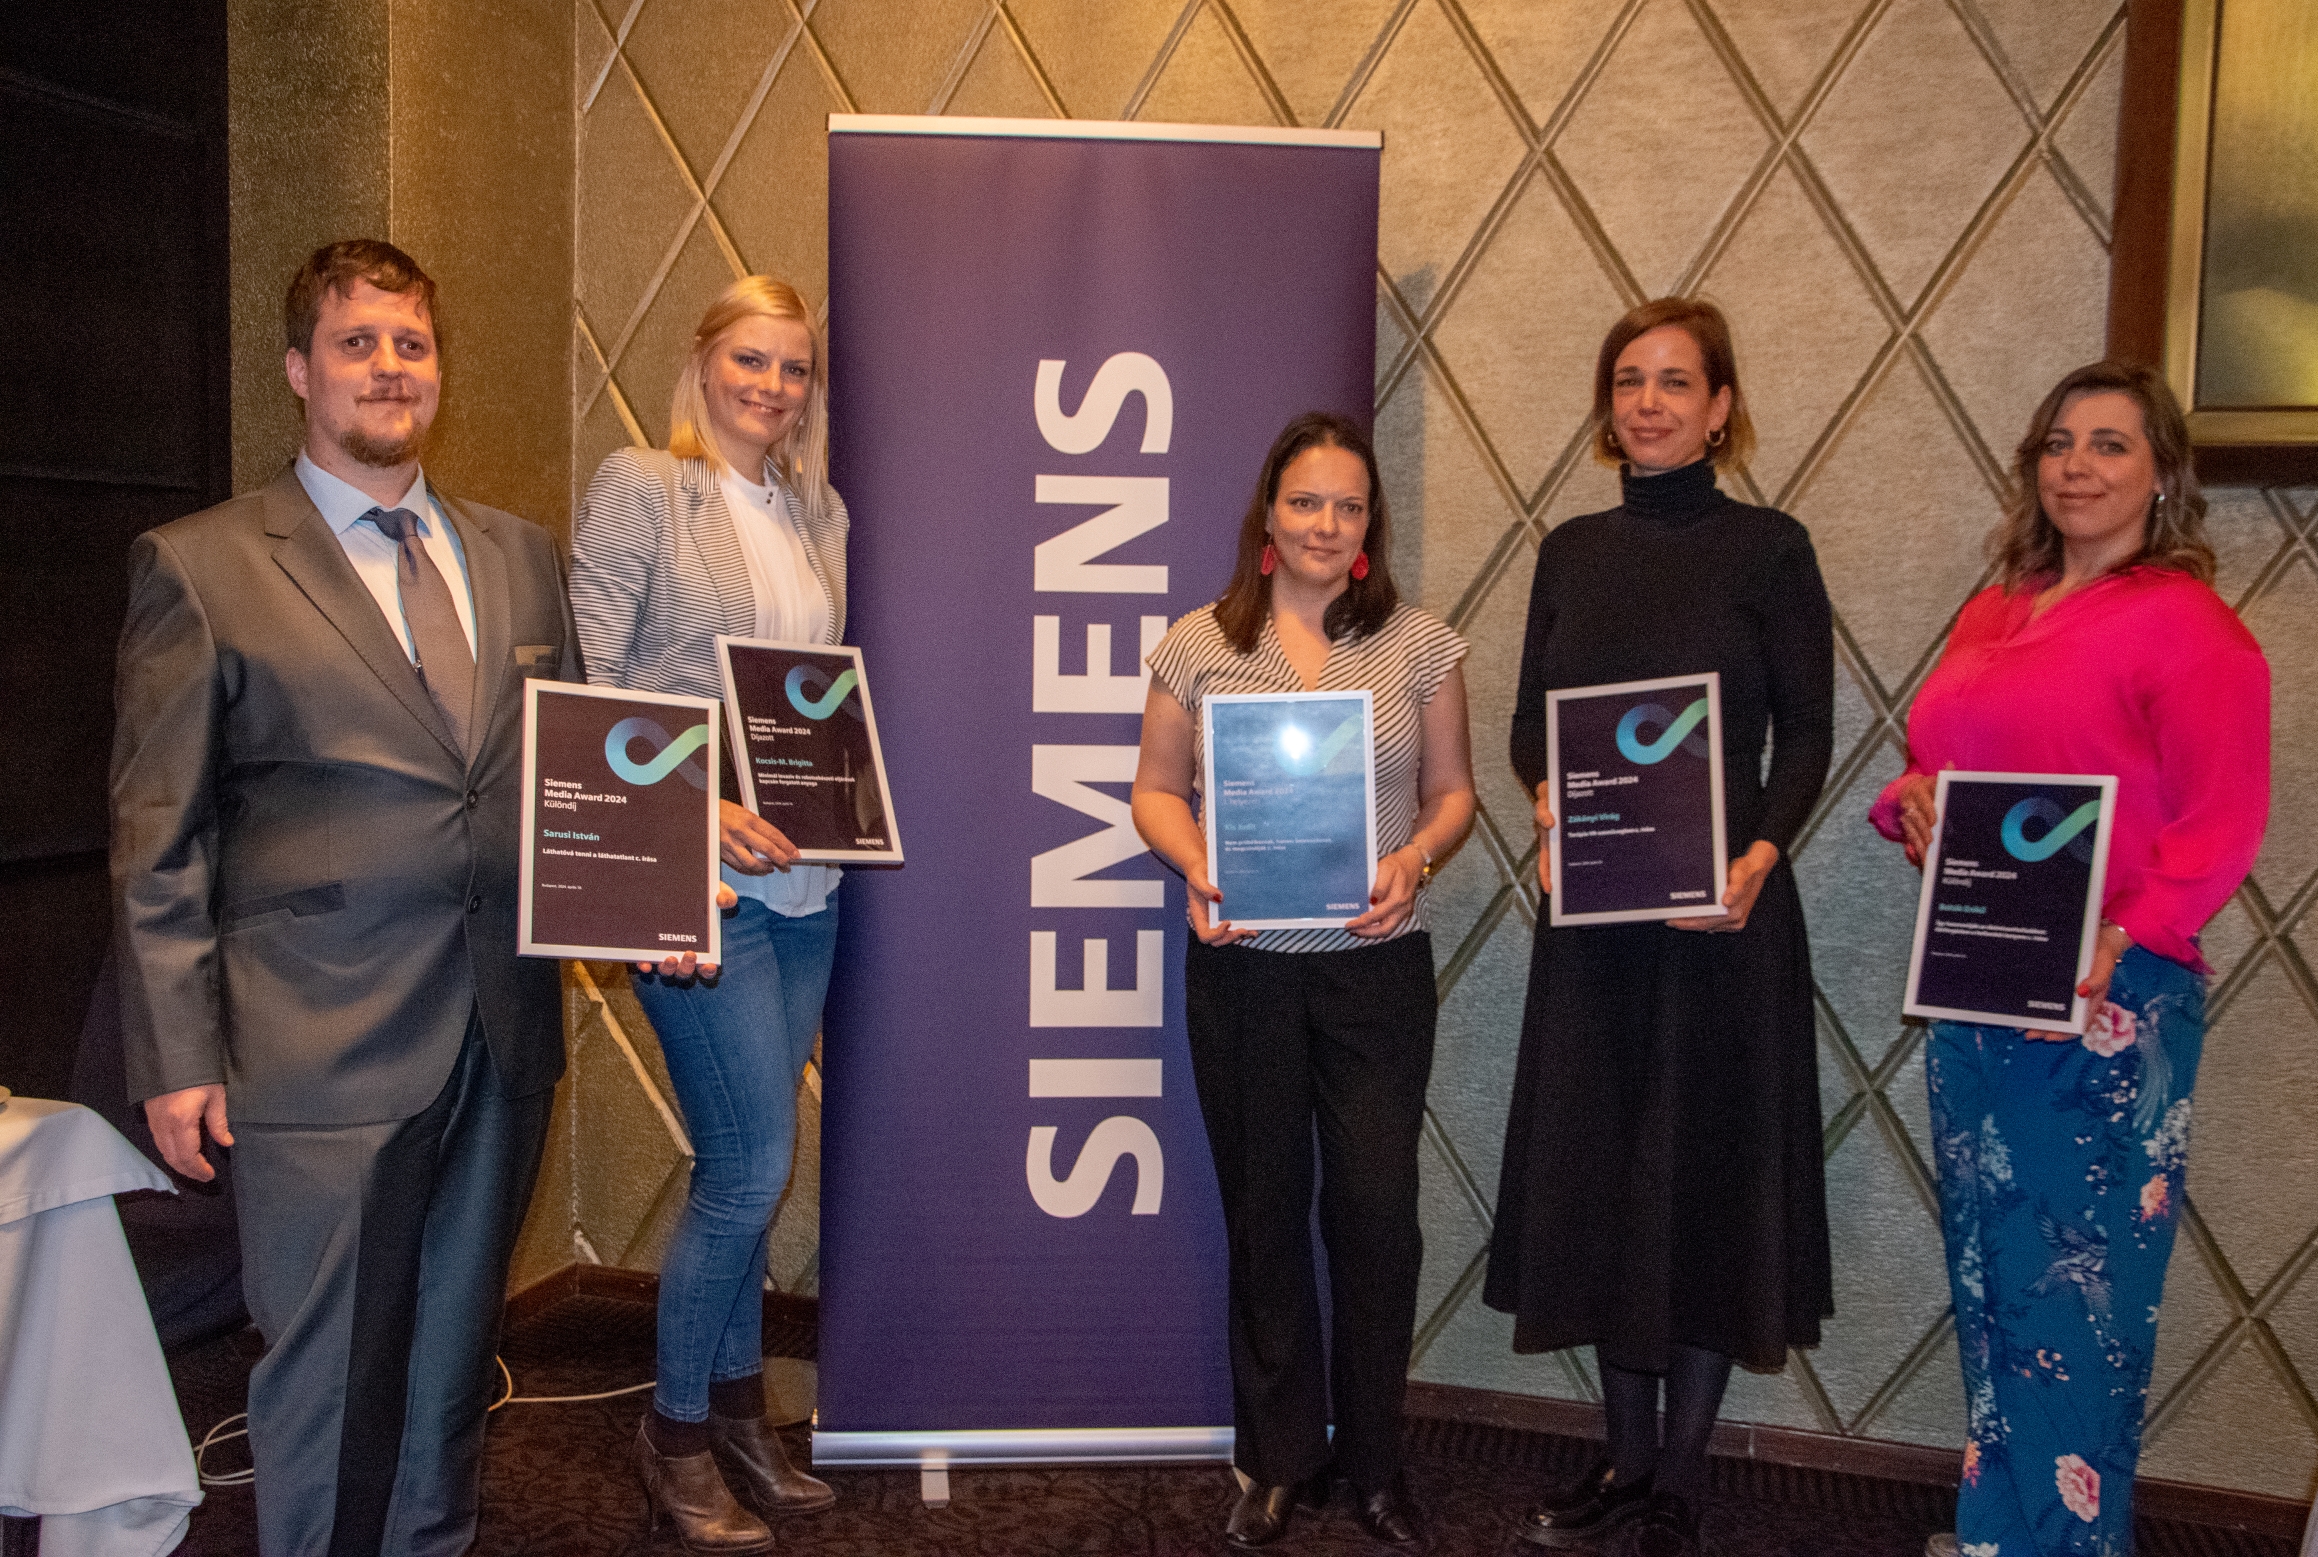 Hungarian Tech Journalists Honored by Siemens